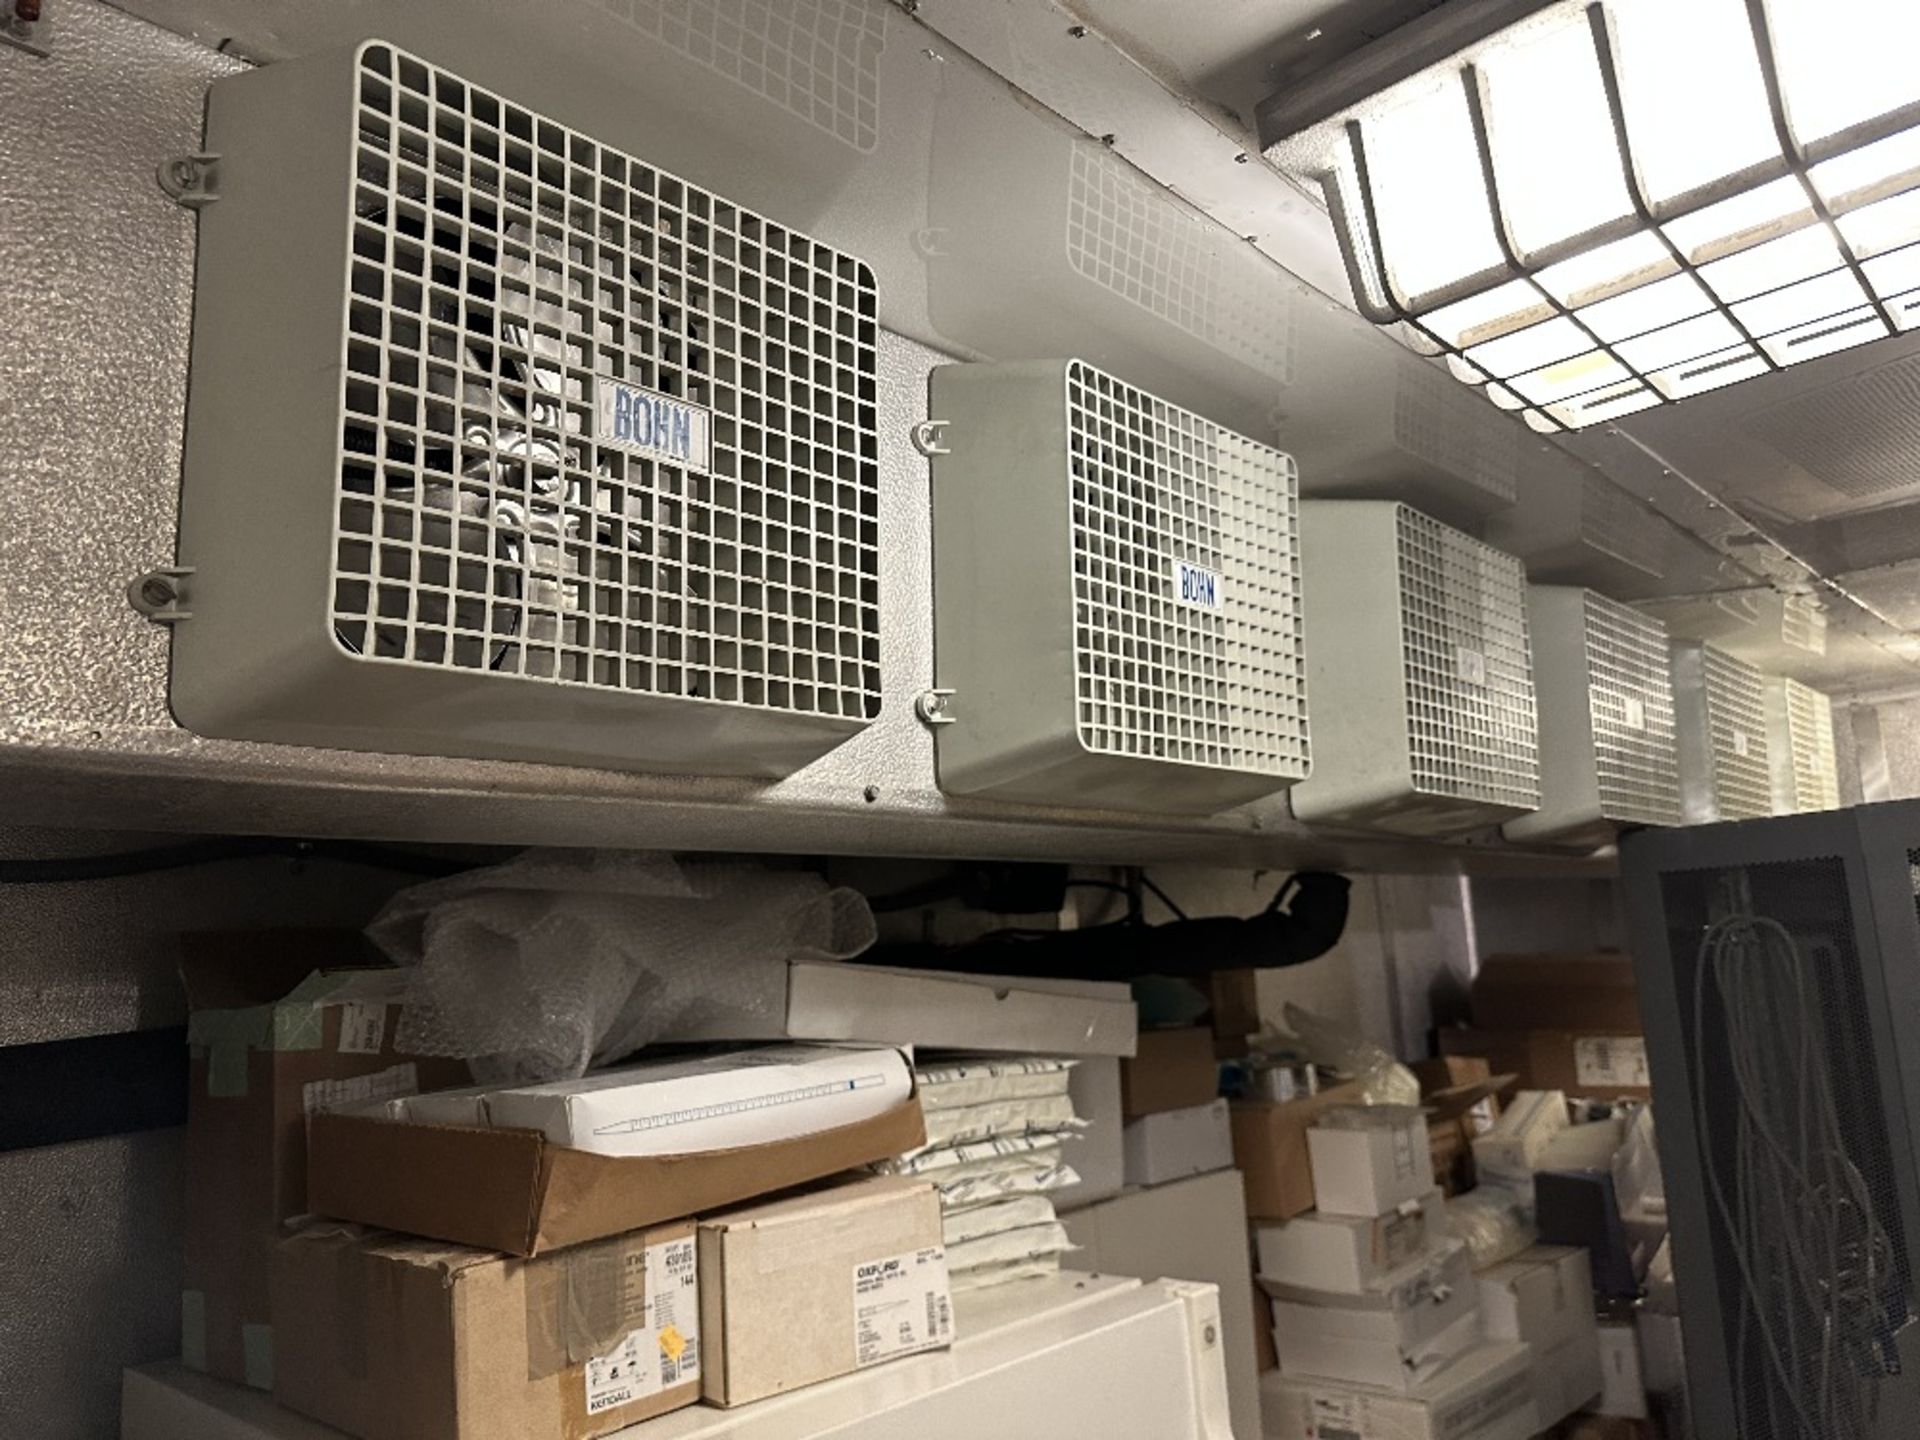 Bohn 6 fan Freezer Condenser (LOCATED IN MIDDLETOWN, N.Y.)-FOR PACKAGING & SHIPPING QUOTE, PLEASE